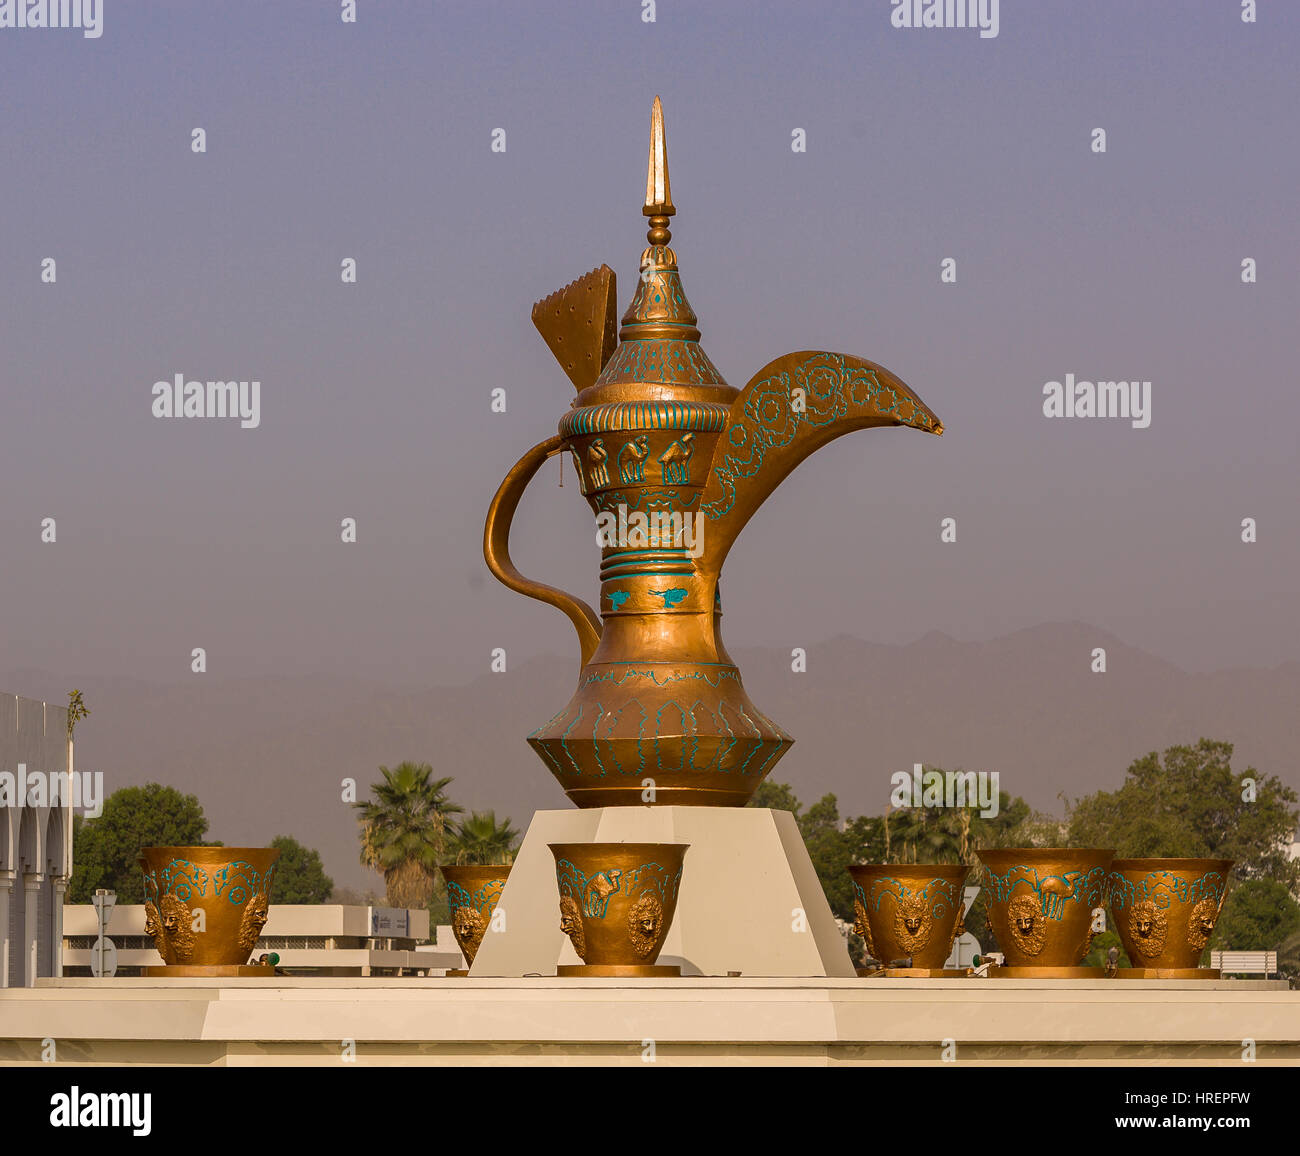 FUJAIRAH, UNITED ARAB EMIRATES - Giant coffee pot  and cups sculpture at rotary traffic circle. Stock Photo